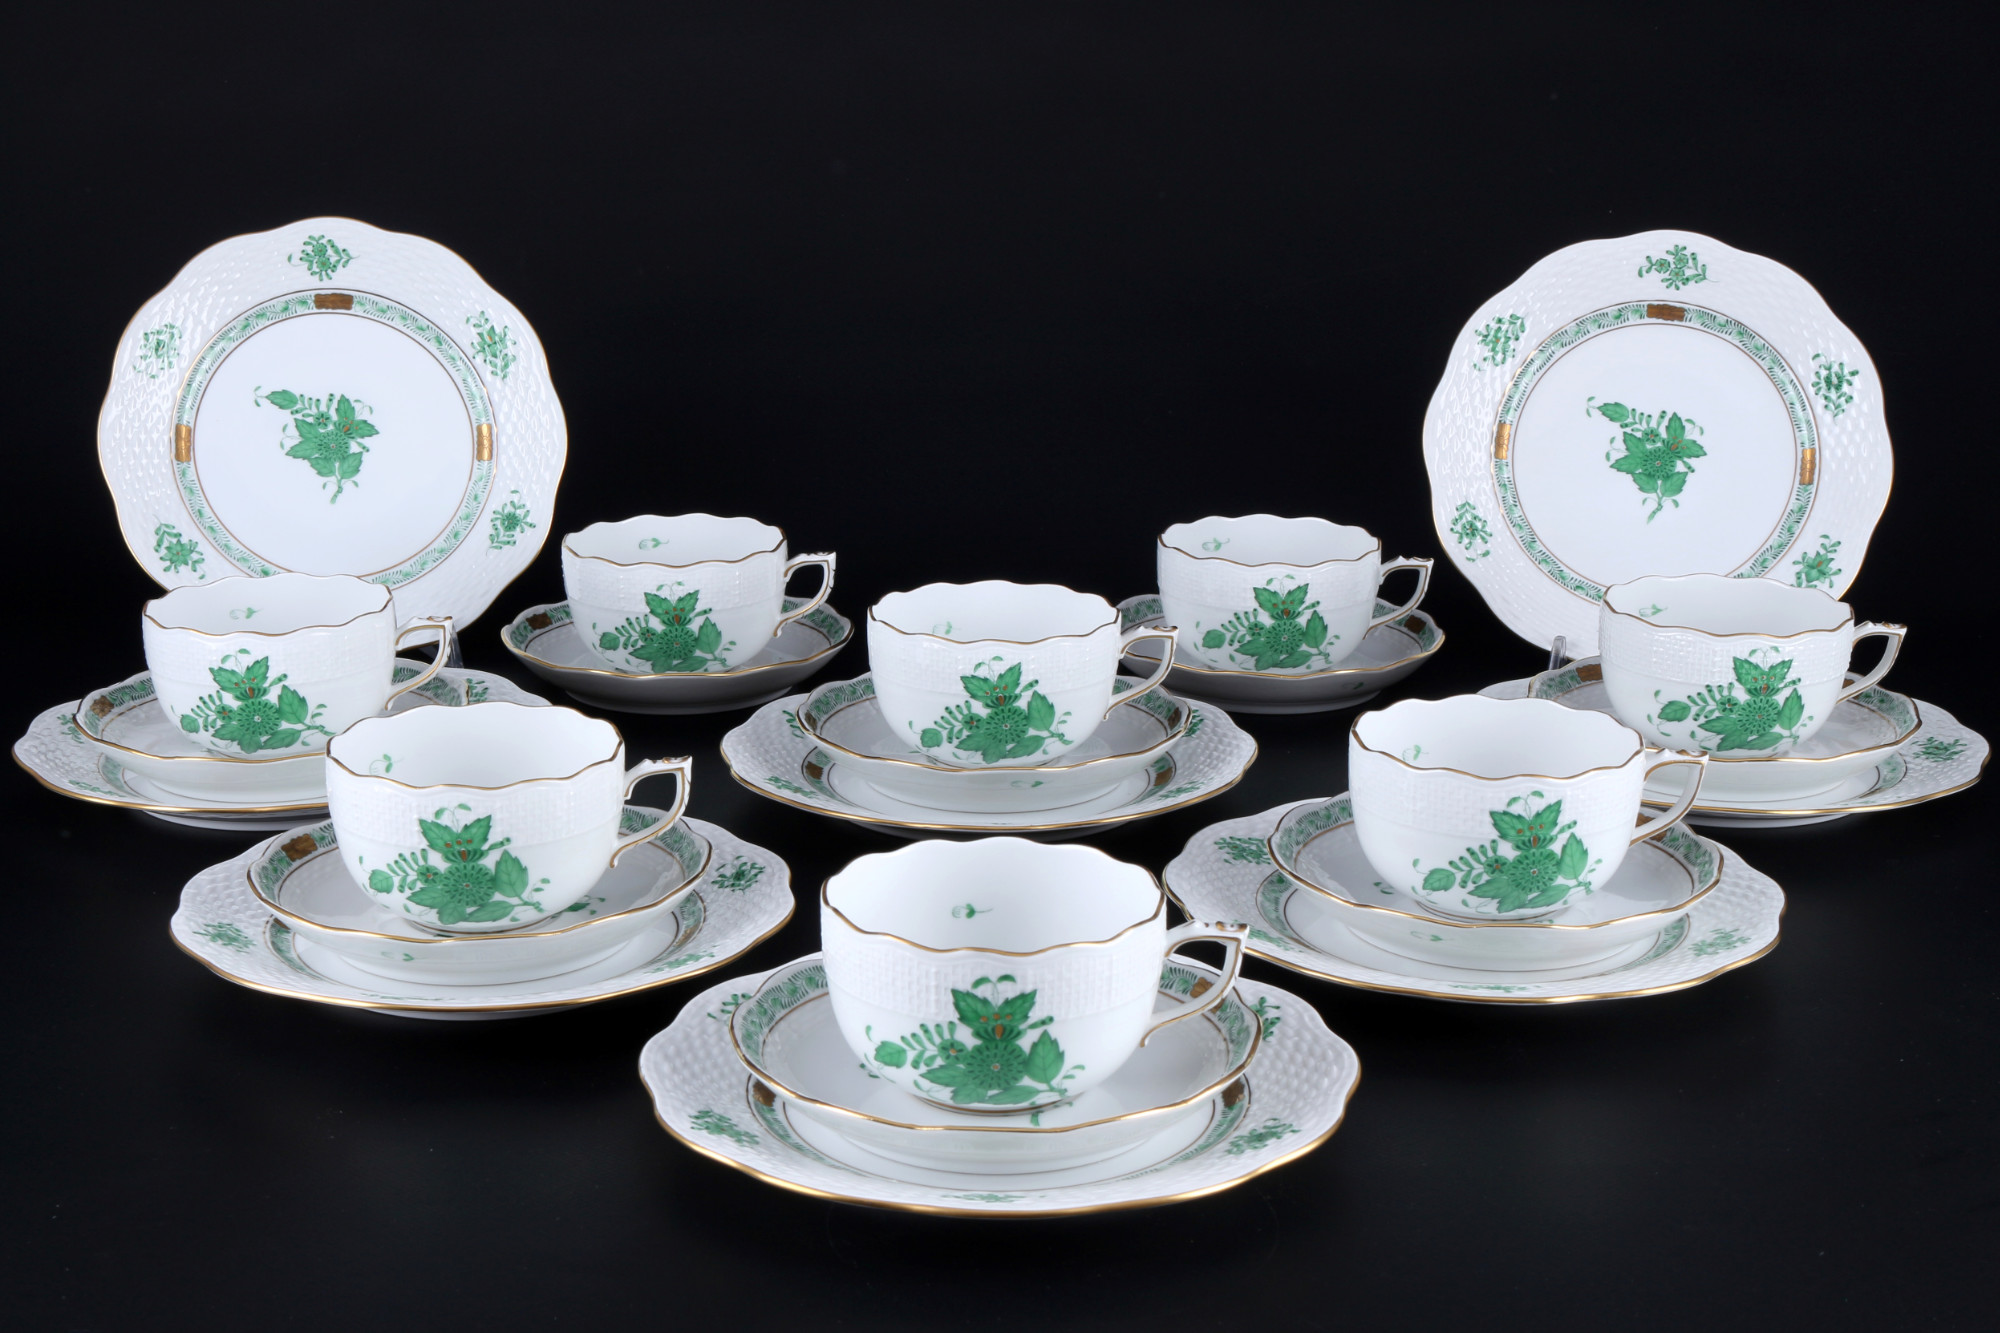 Herend Apponyi Vert 8 tea cups with saucers and plates, Teegedecke,